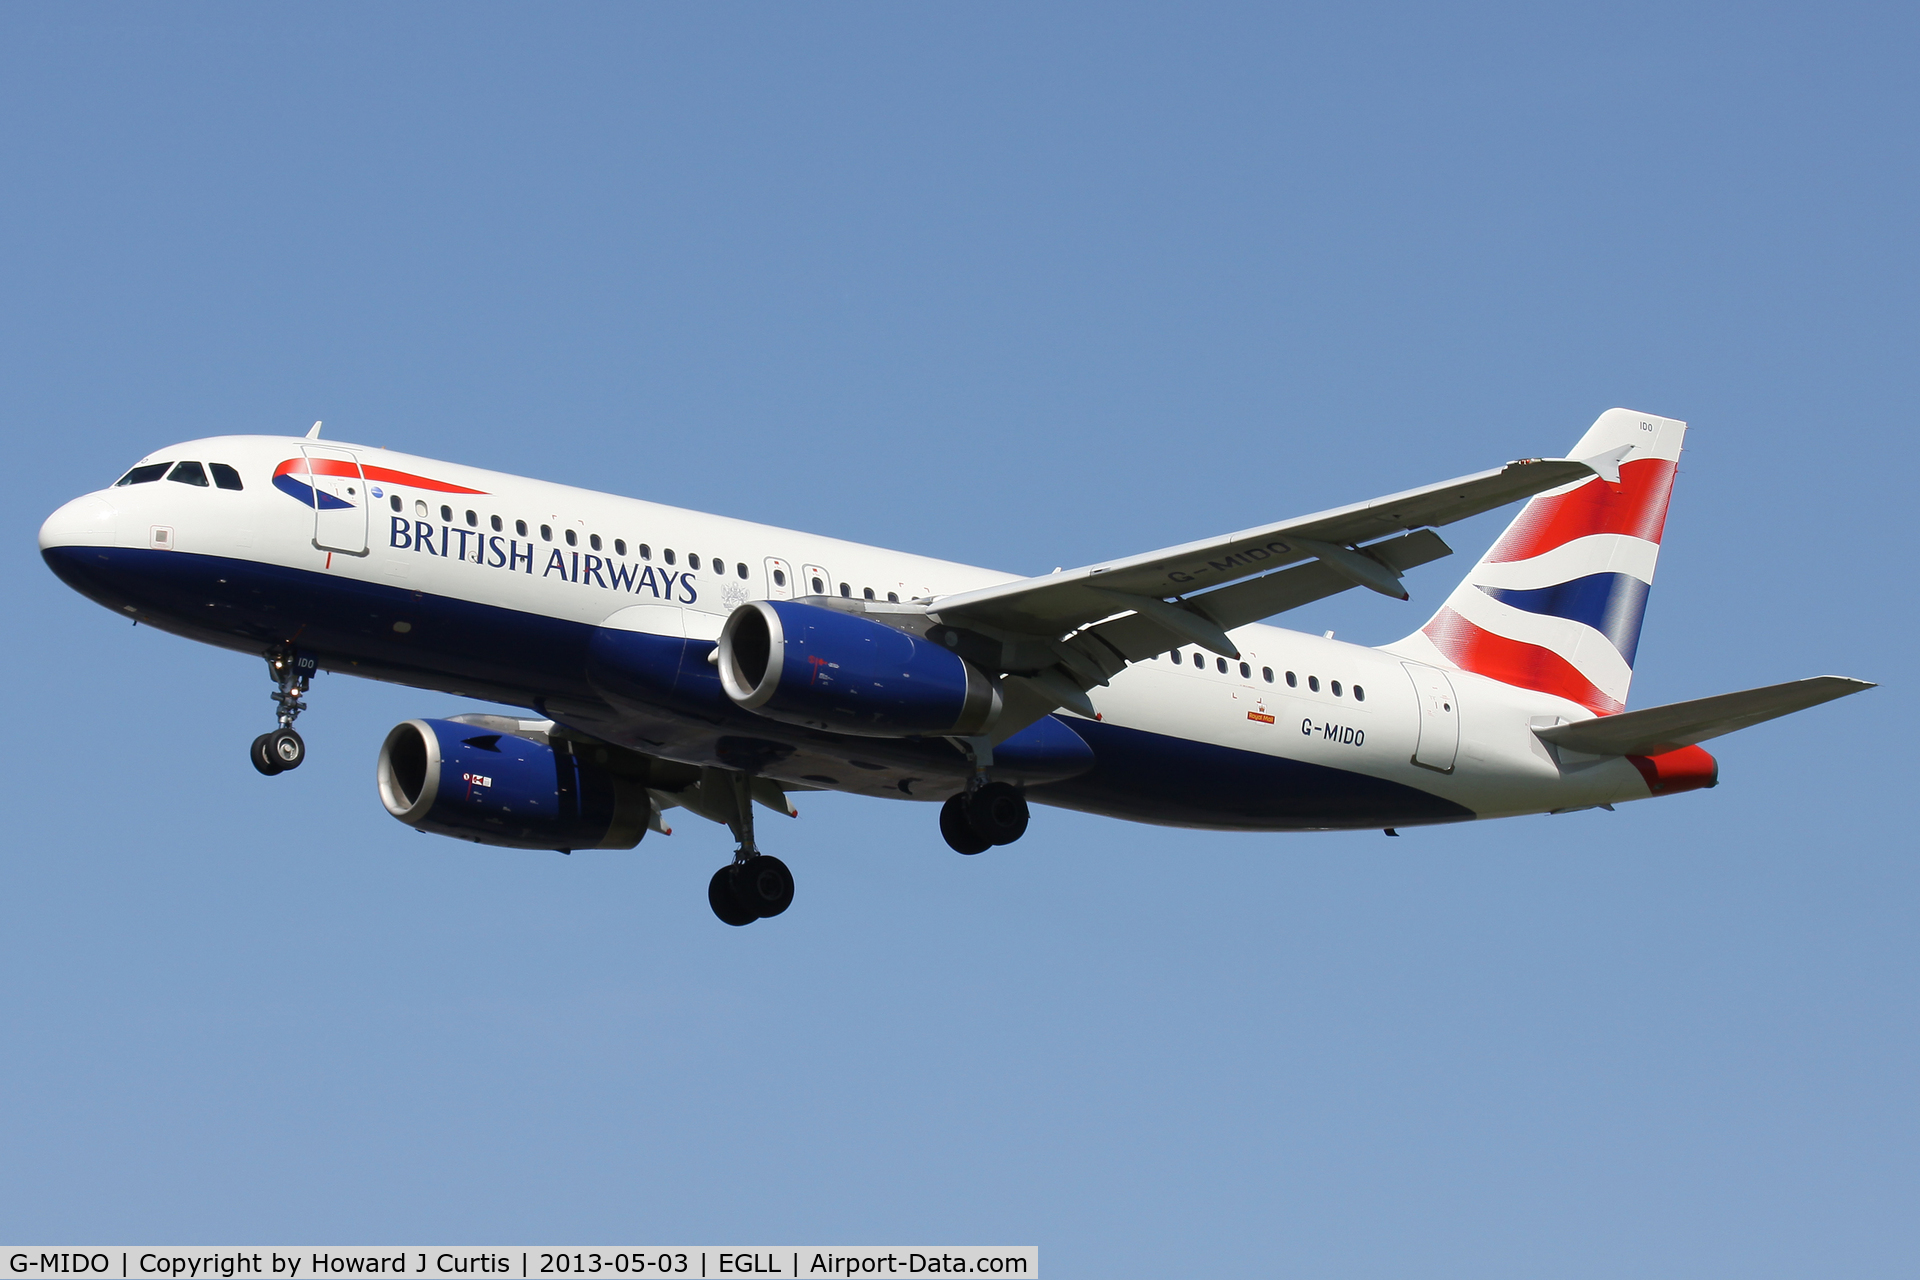 G-MIDO, 2002 Airbus A320-232 C/N 1987, British Airways, on approach to runway 27L.